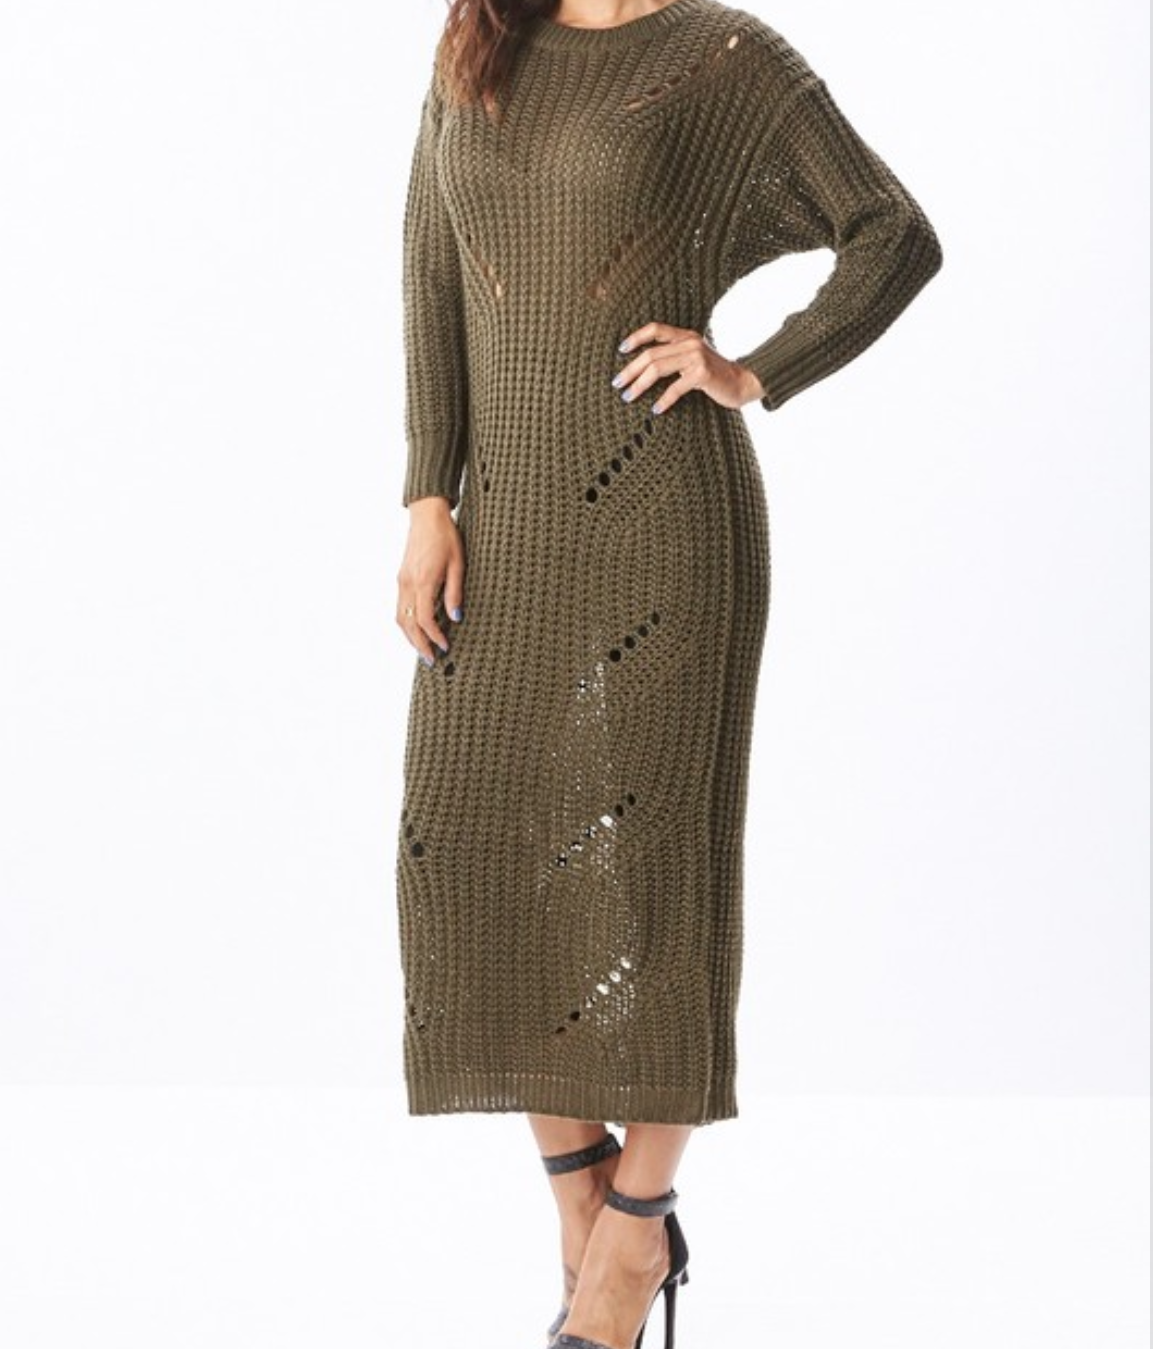 Sweater Back Ripped Long Sleeve Dress - Dreams Come True Boutique 